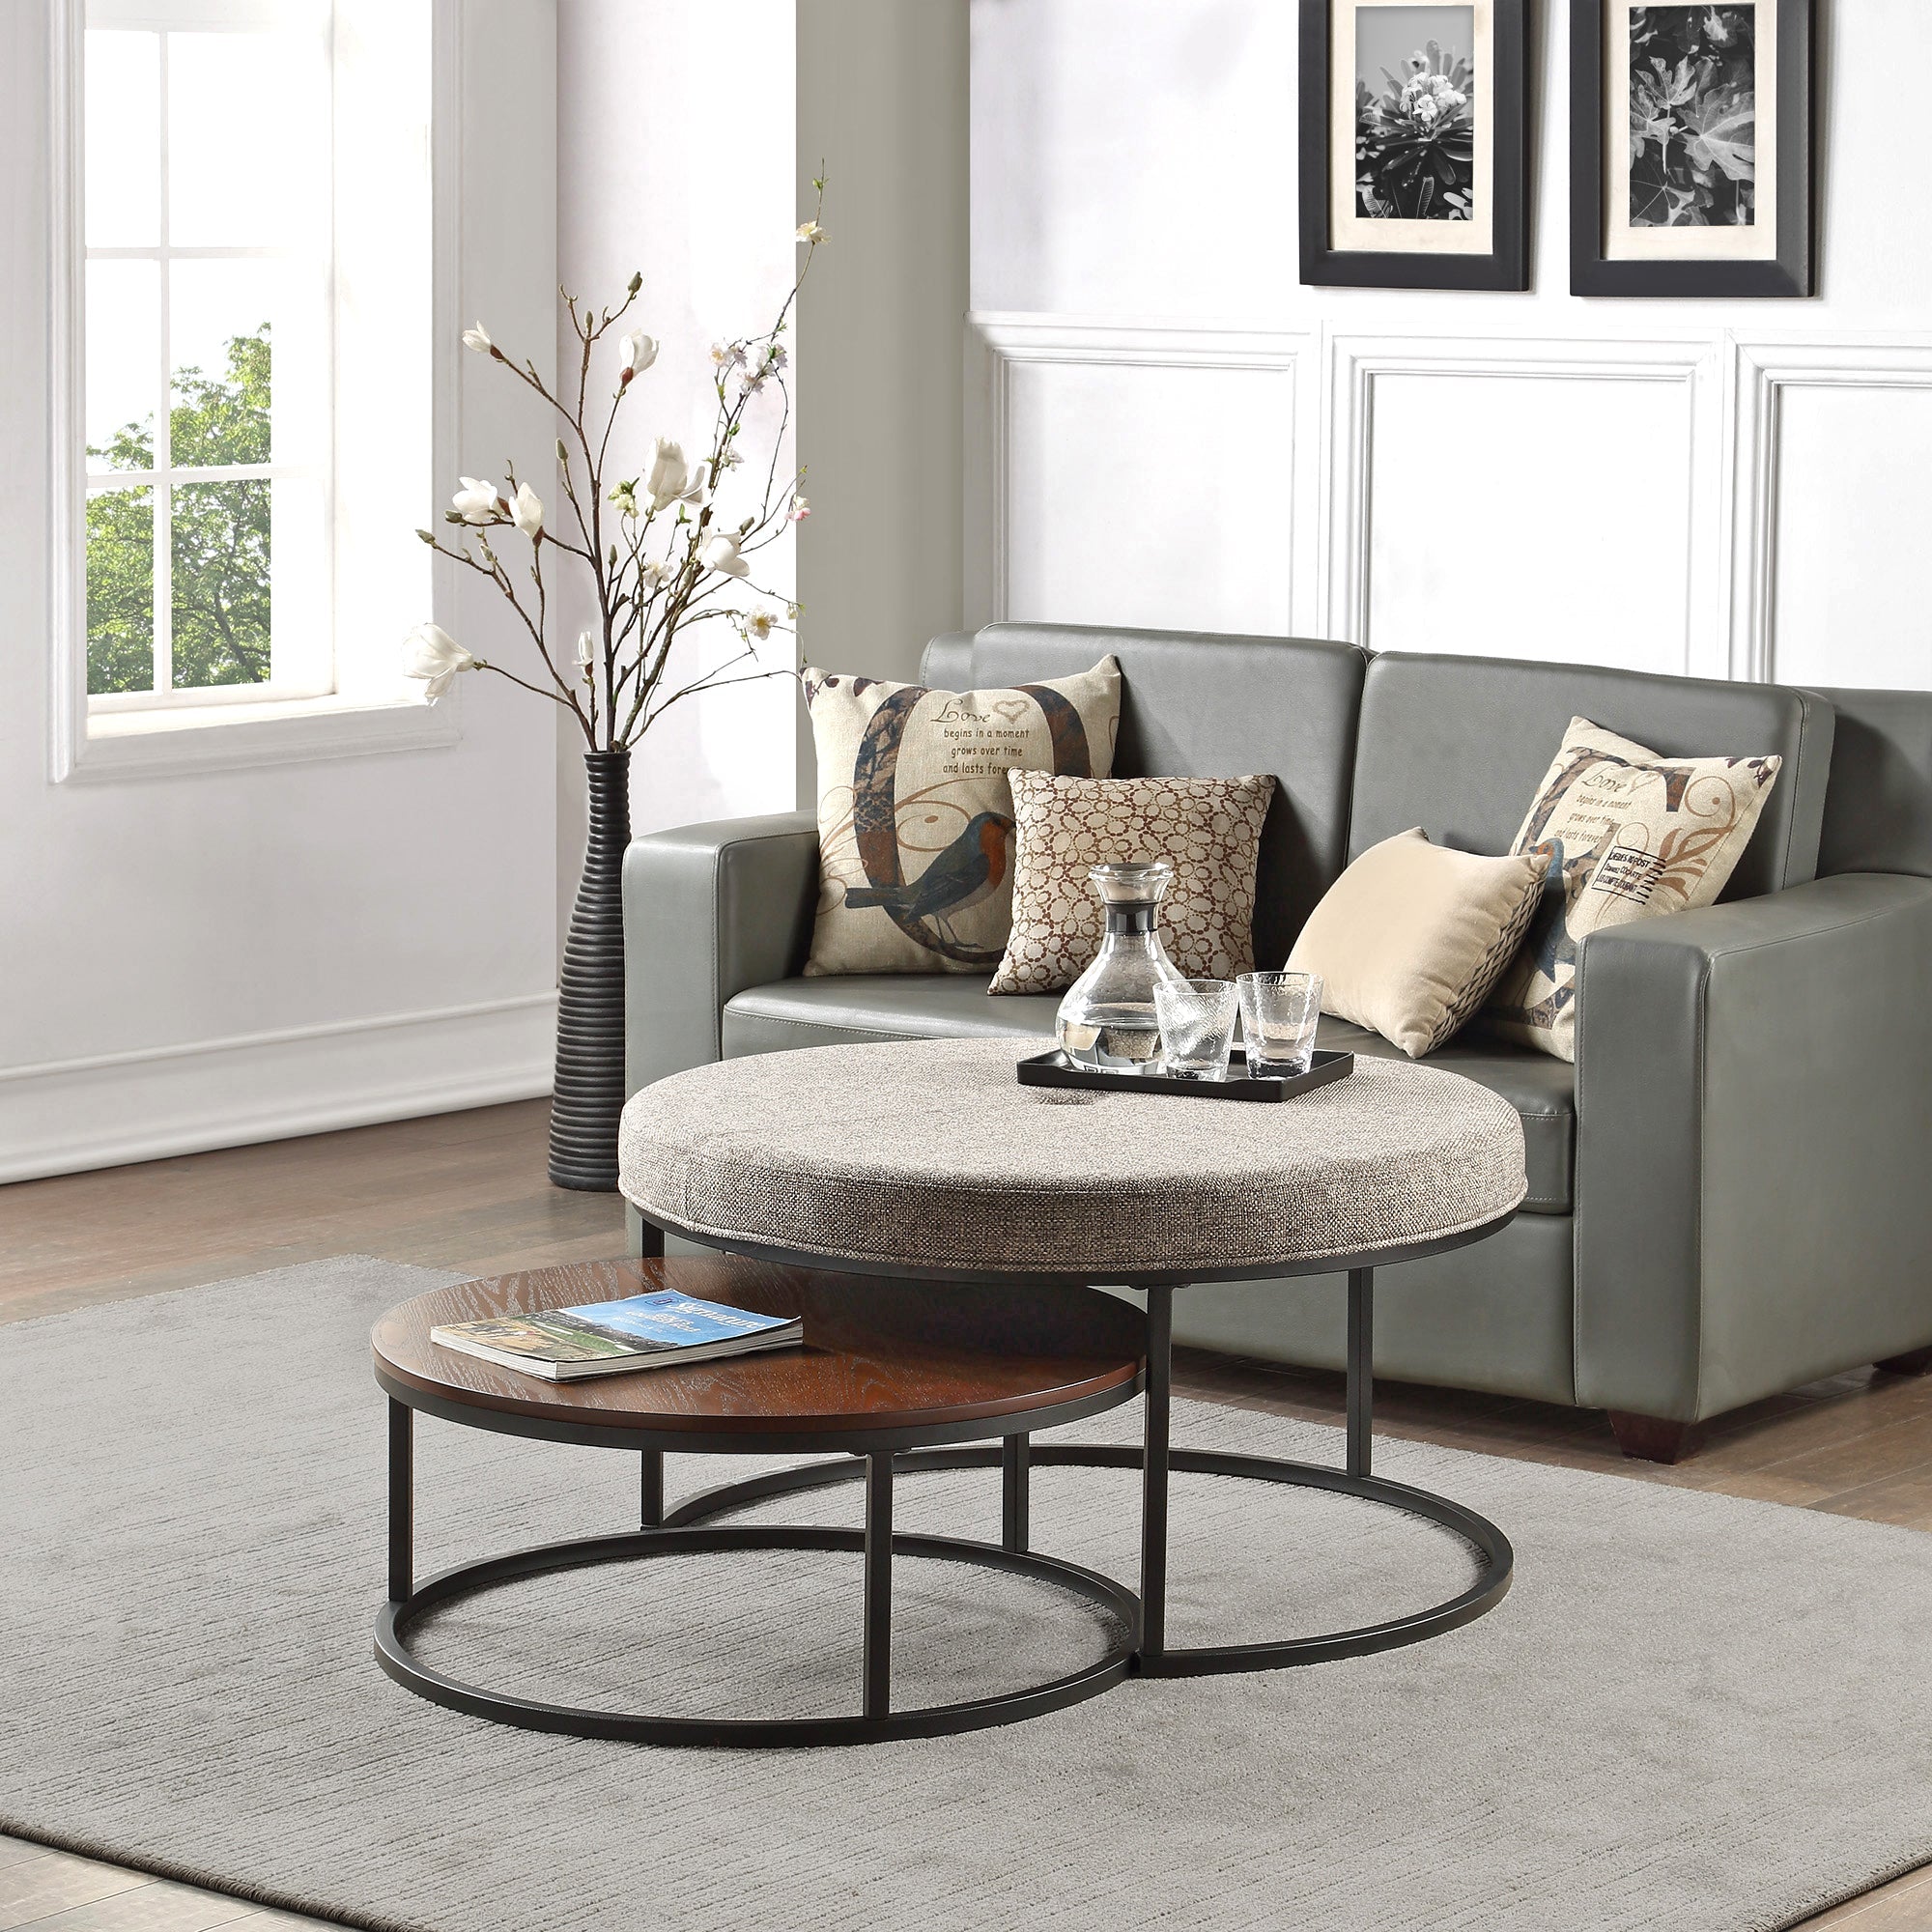 Gray upholstered ottoman and brown coffee table